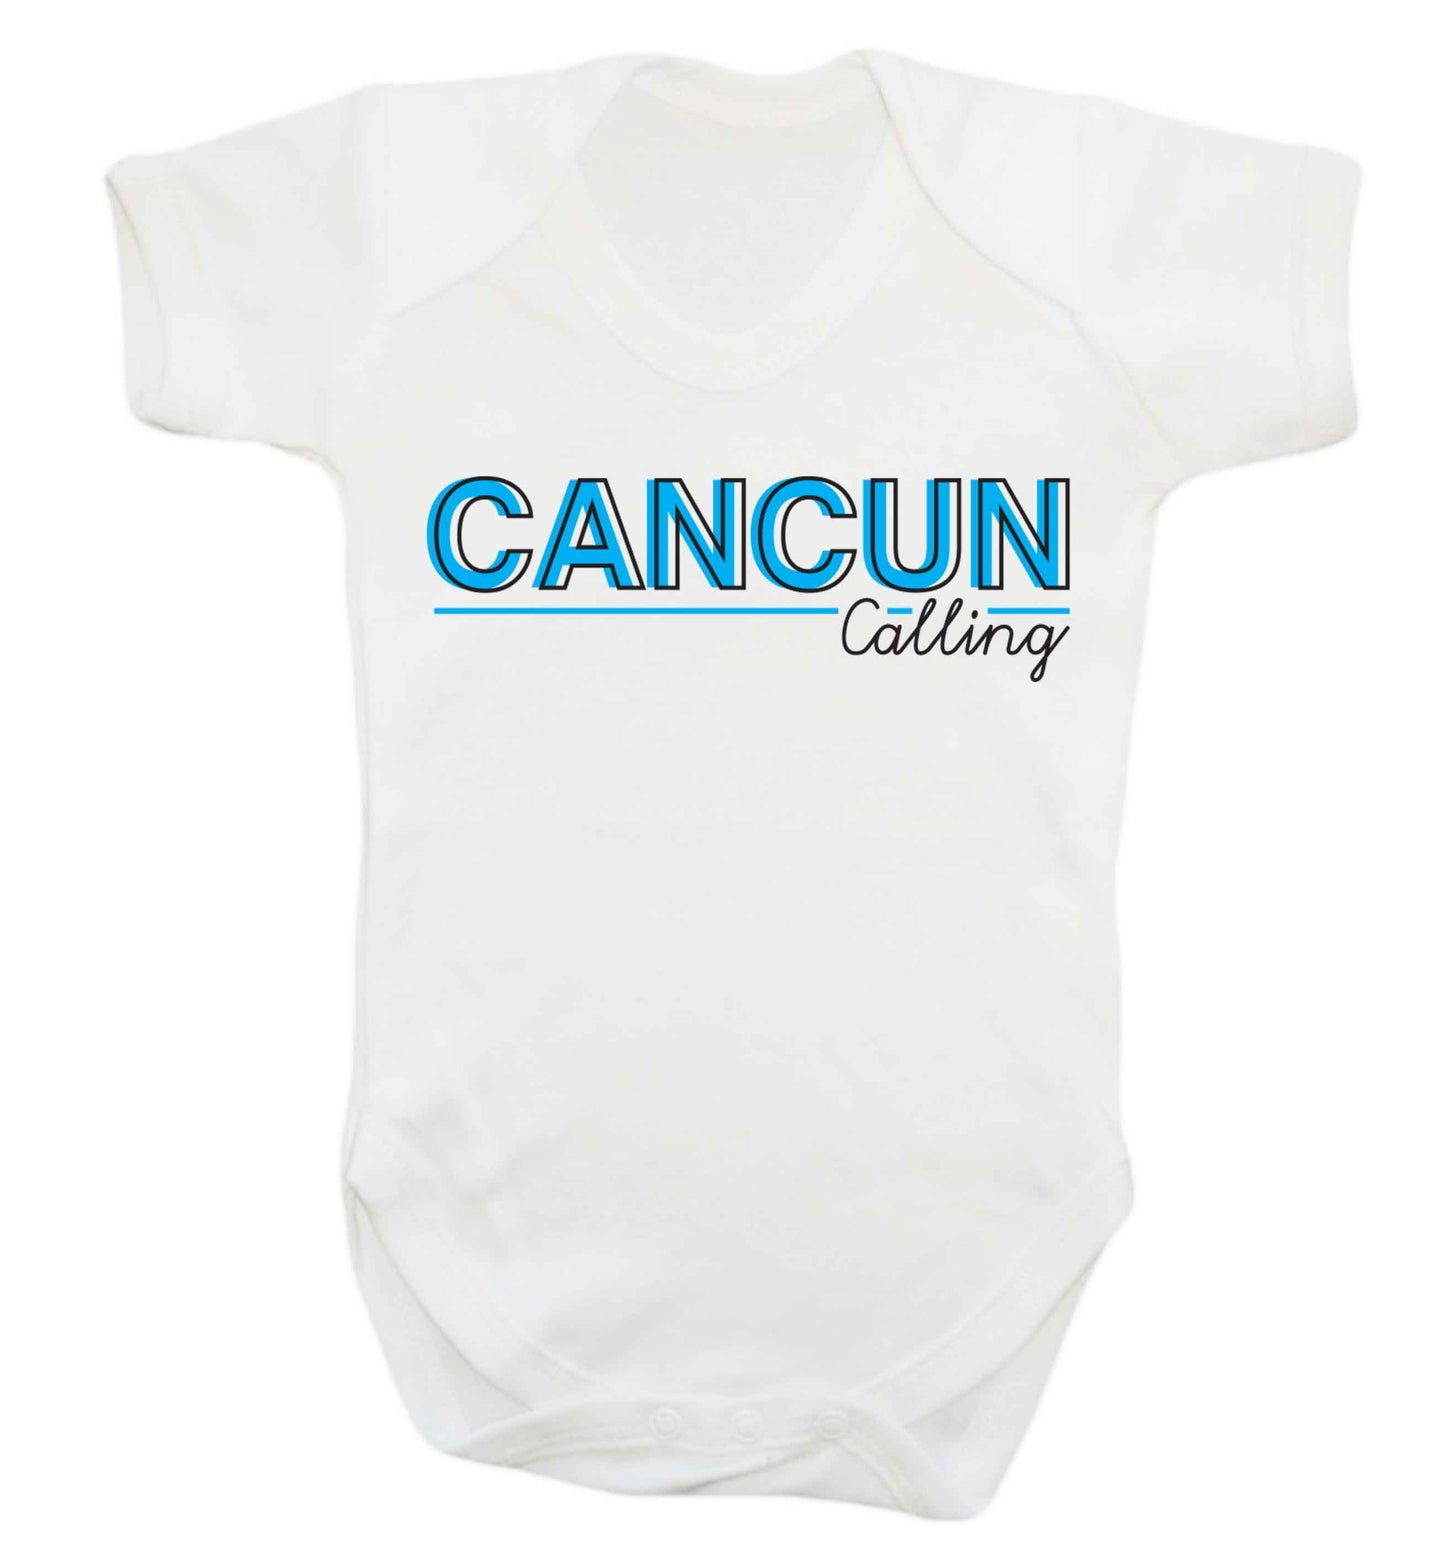 Cancun calling Baby Vest white 18-24 months